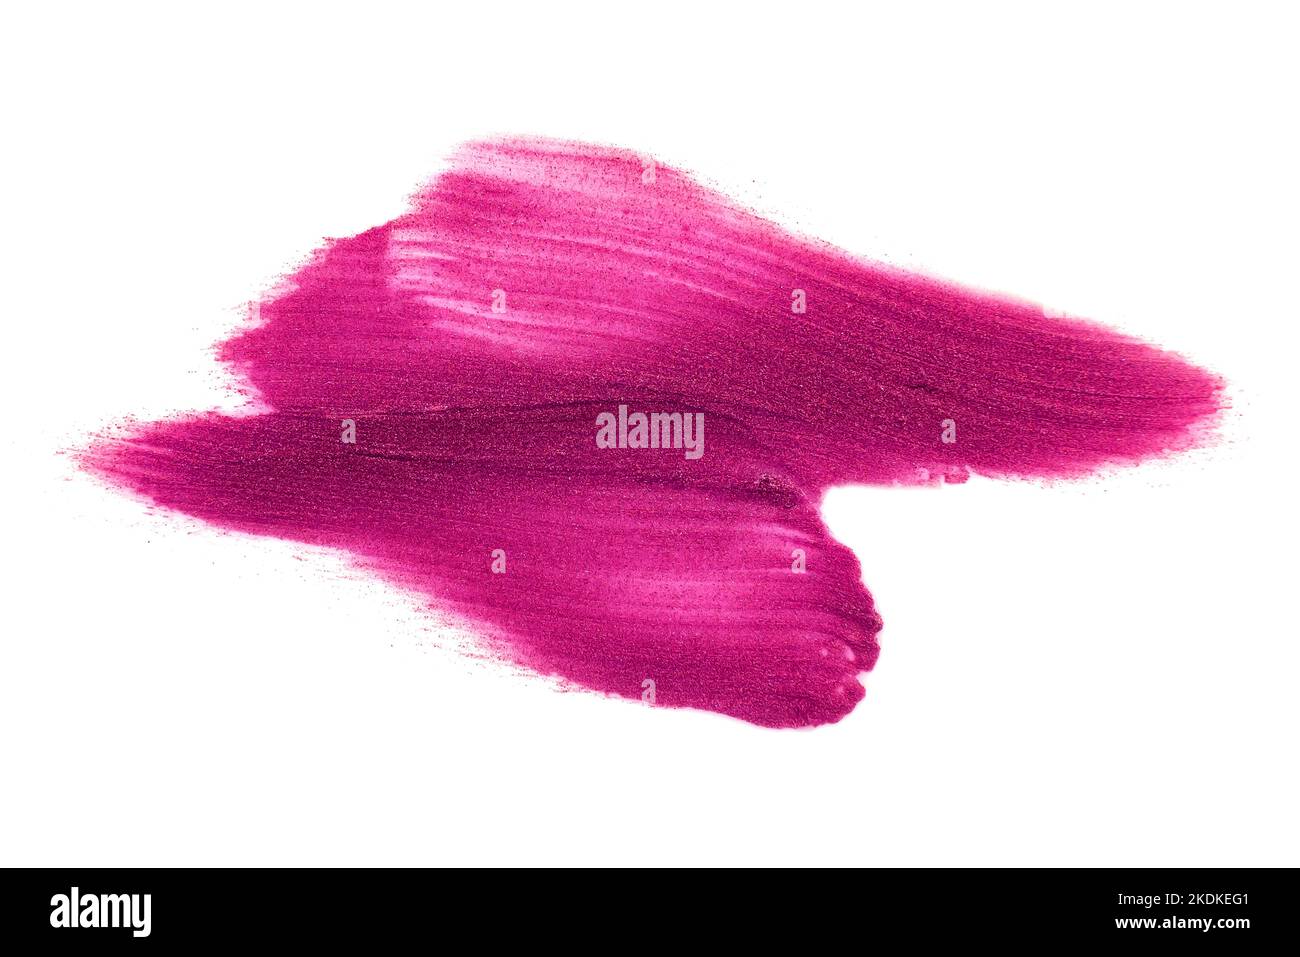 lipstick. Smear for lipstick on a white background. Creamy makeup texture. Sample or sampler brush stroke cosmetic product red, violet color Stock Photo